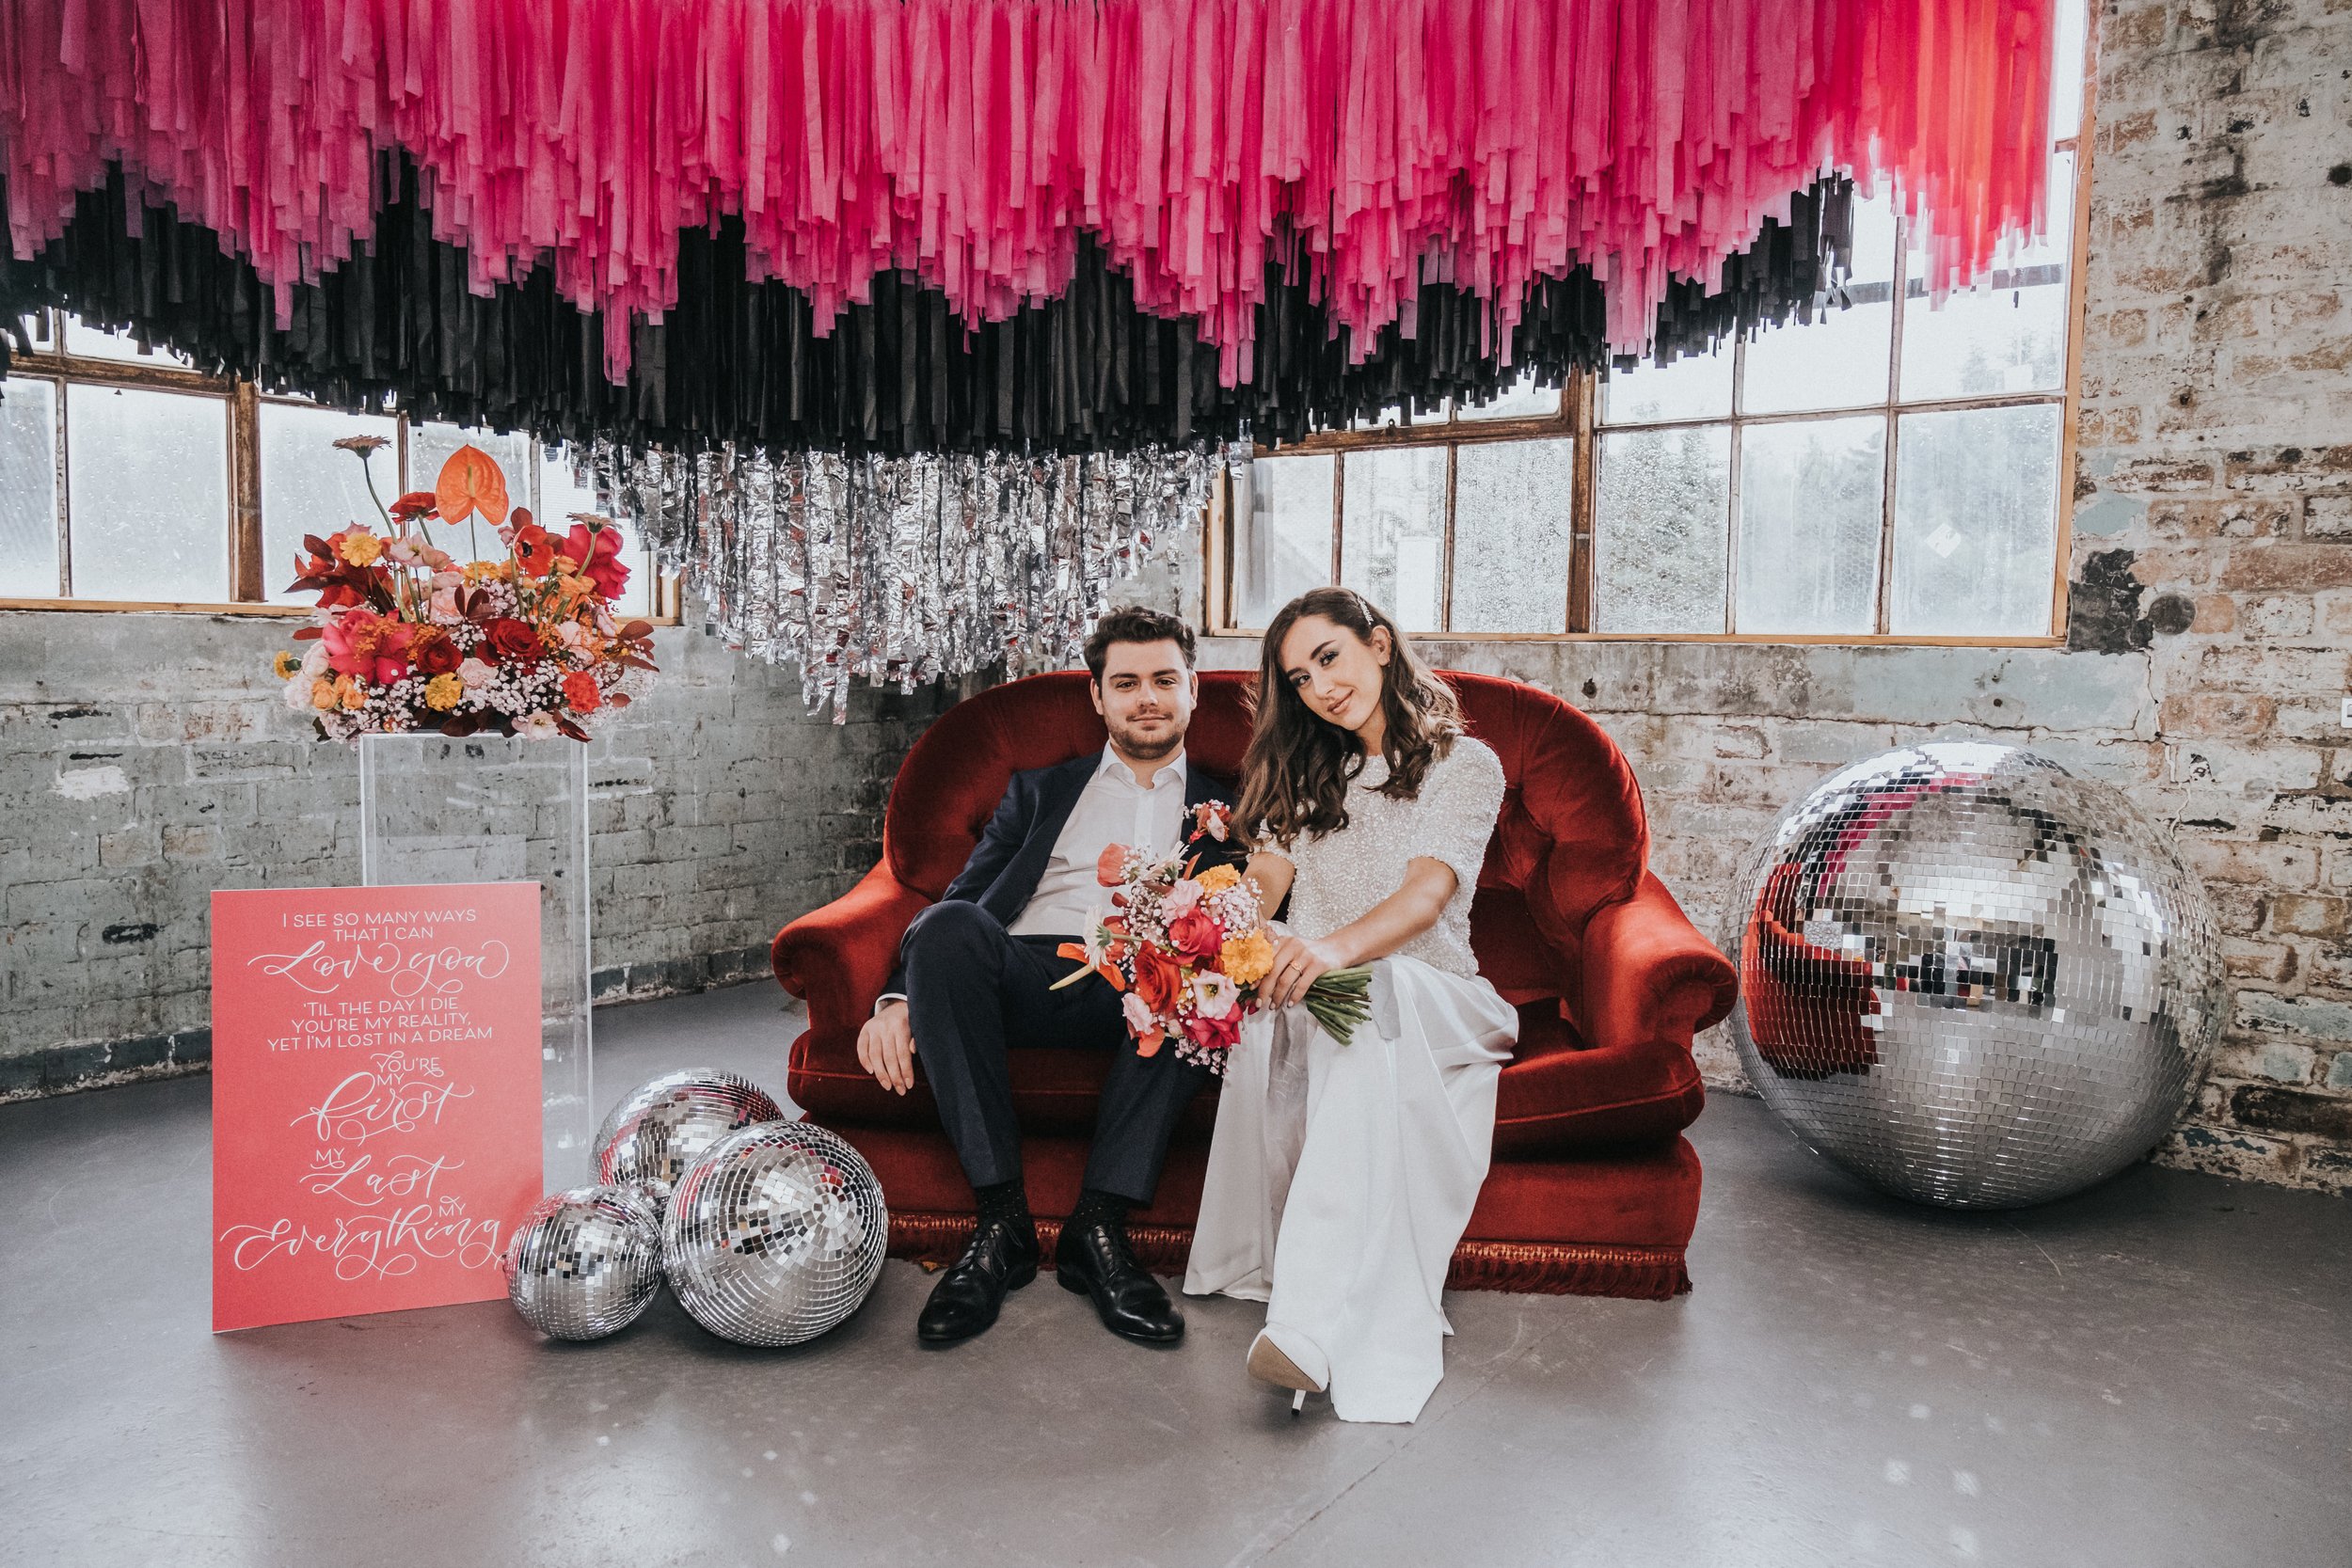 Disco themed wedding stationery with pink, black, grey and red colour scheme - disco ball wedding - calligraphy wedding signage and welcome sign with lyrics.jpg